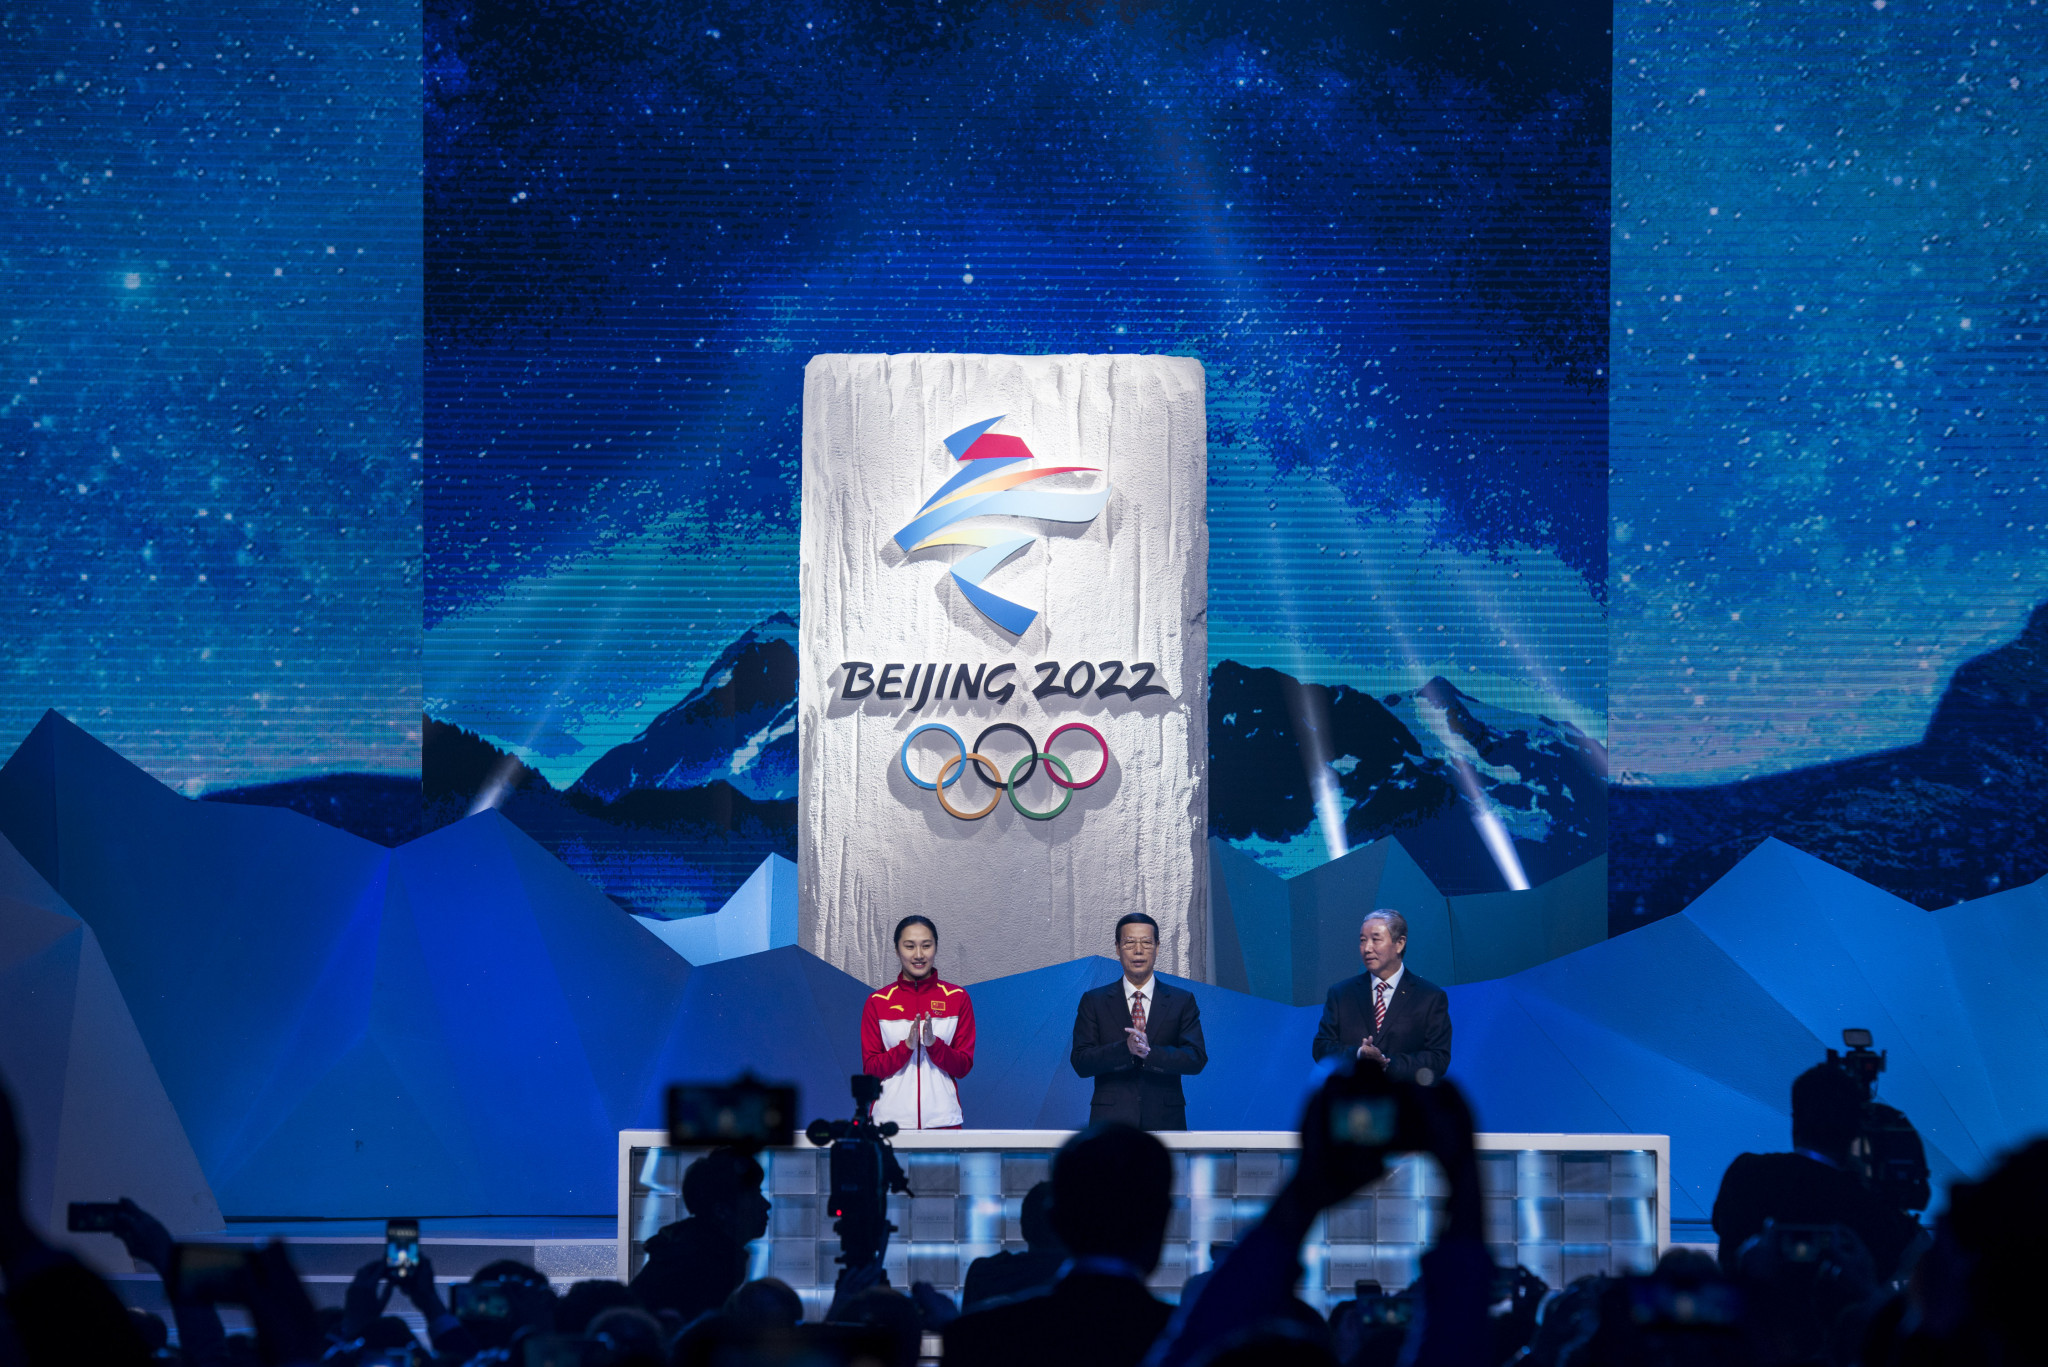 Beijing 2022 leaders are hoping to attract more skilled international workers to play a part in the Winter Olympics and Paralympics ©Getty Images